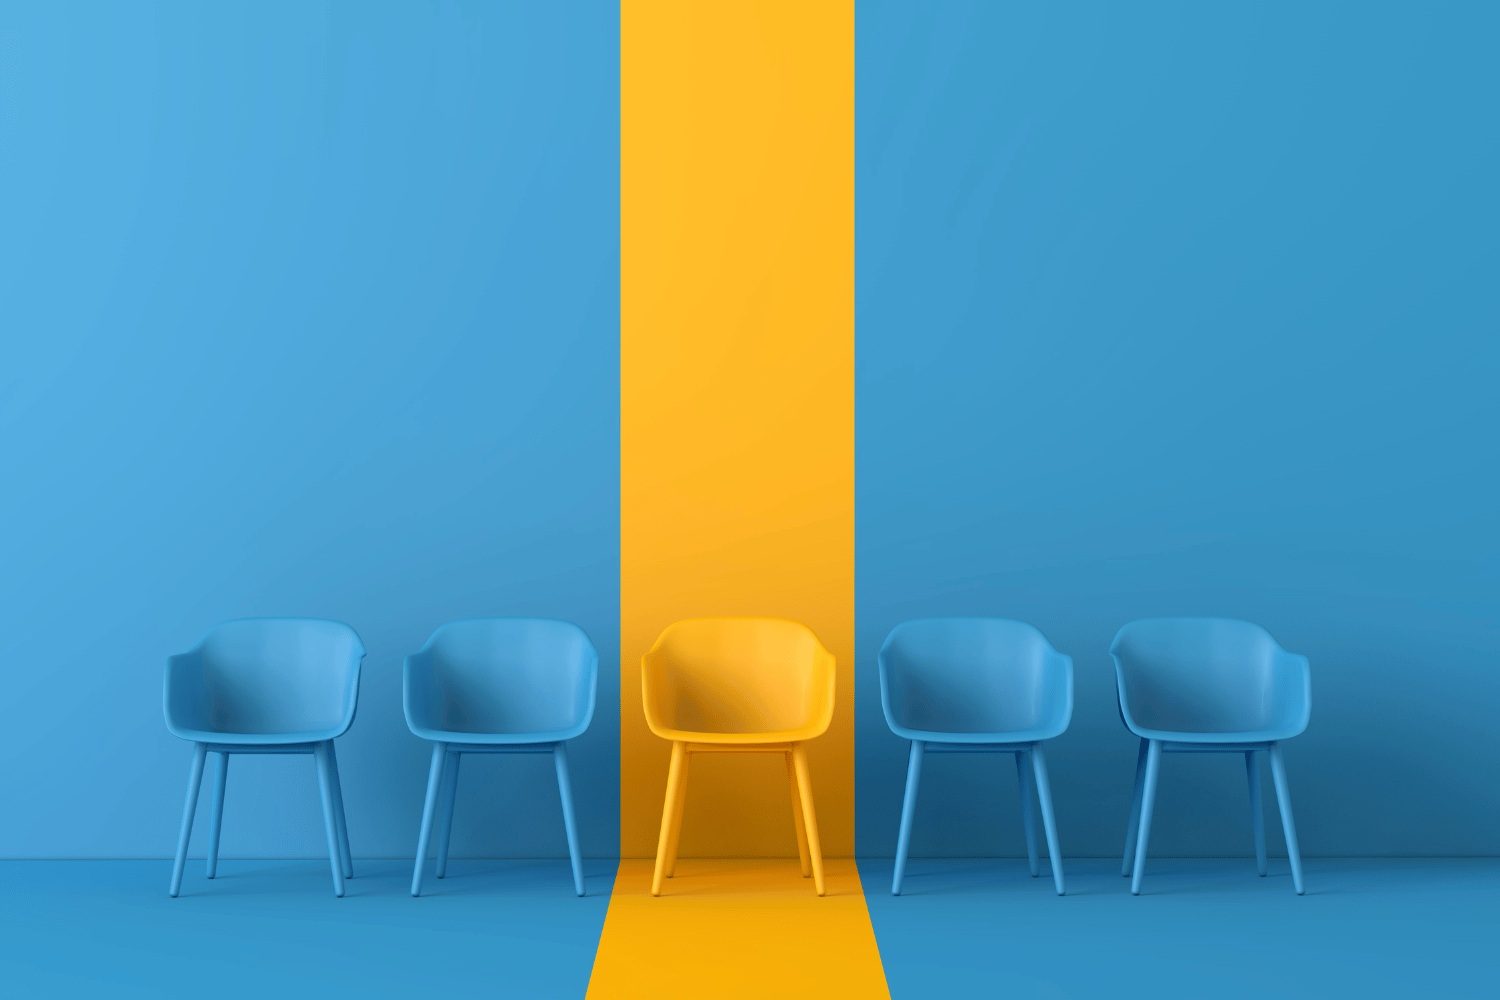 four empty blue chairs against blue background with one empty yellow chair against yellow background